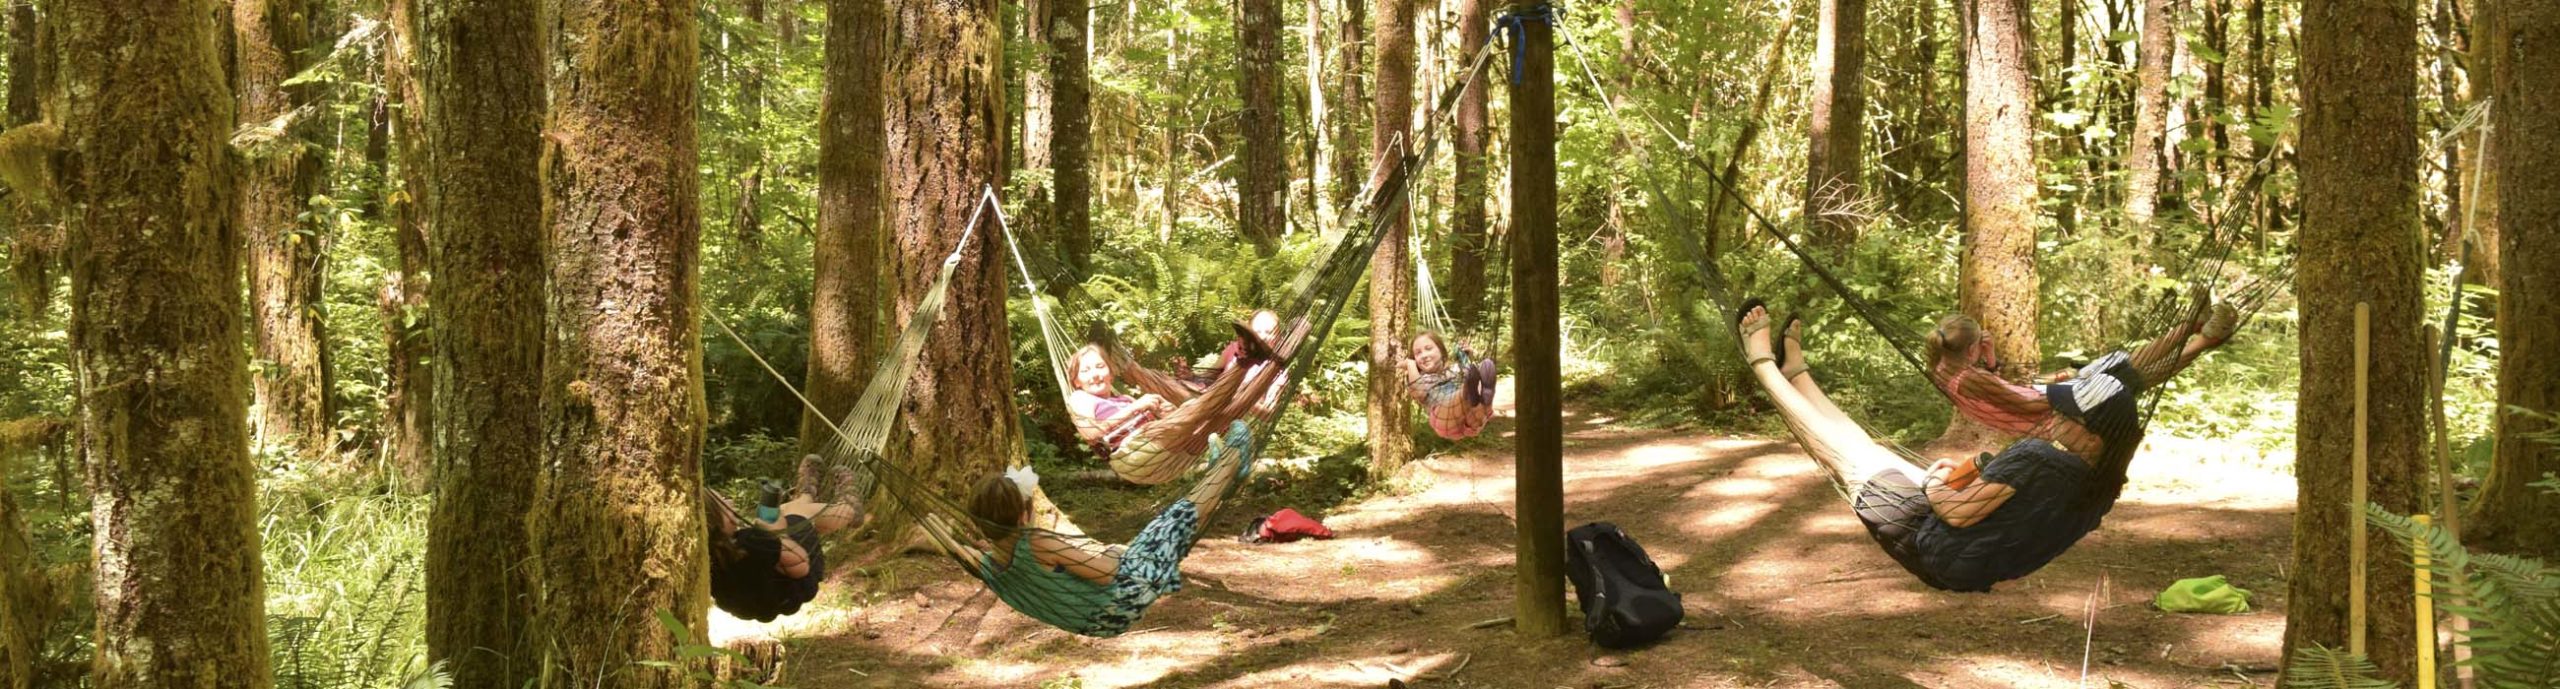 Campers relaxing on hammocks in hammock village at Camp Lutherwood Oregon